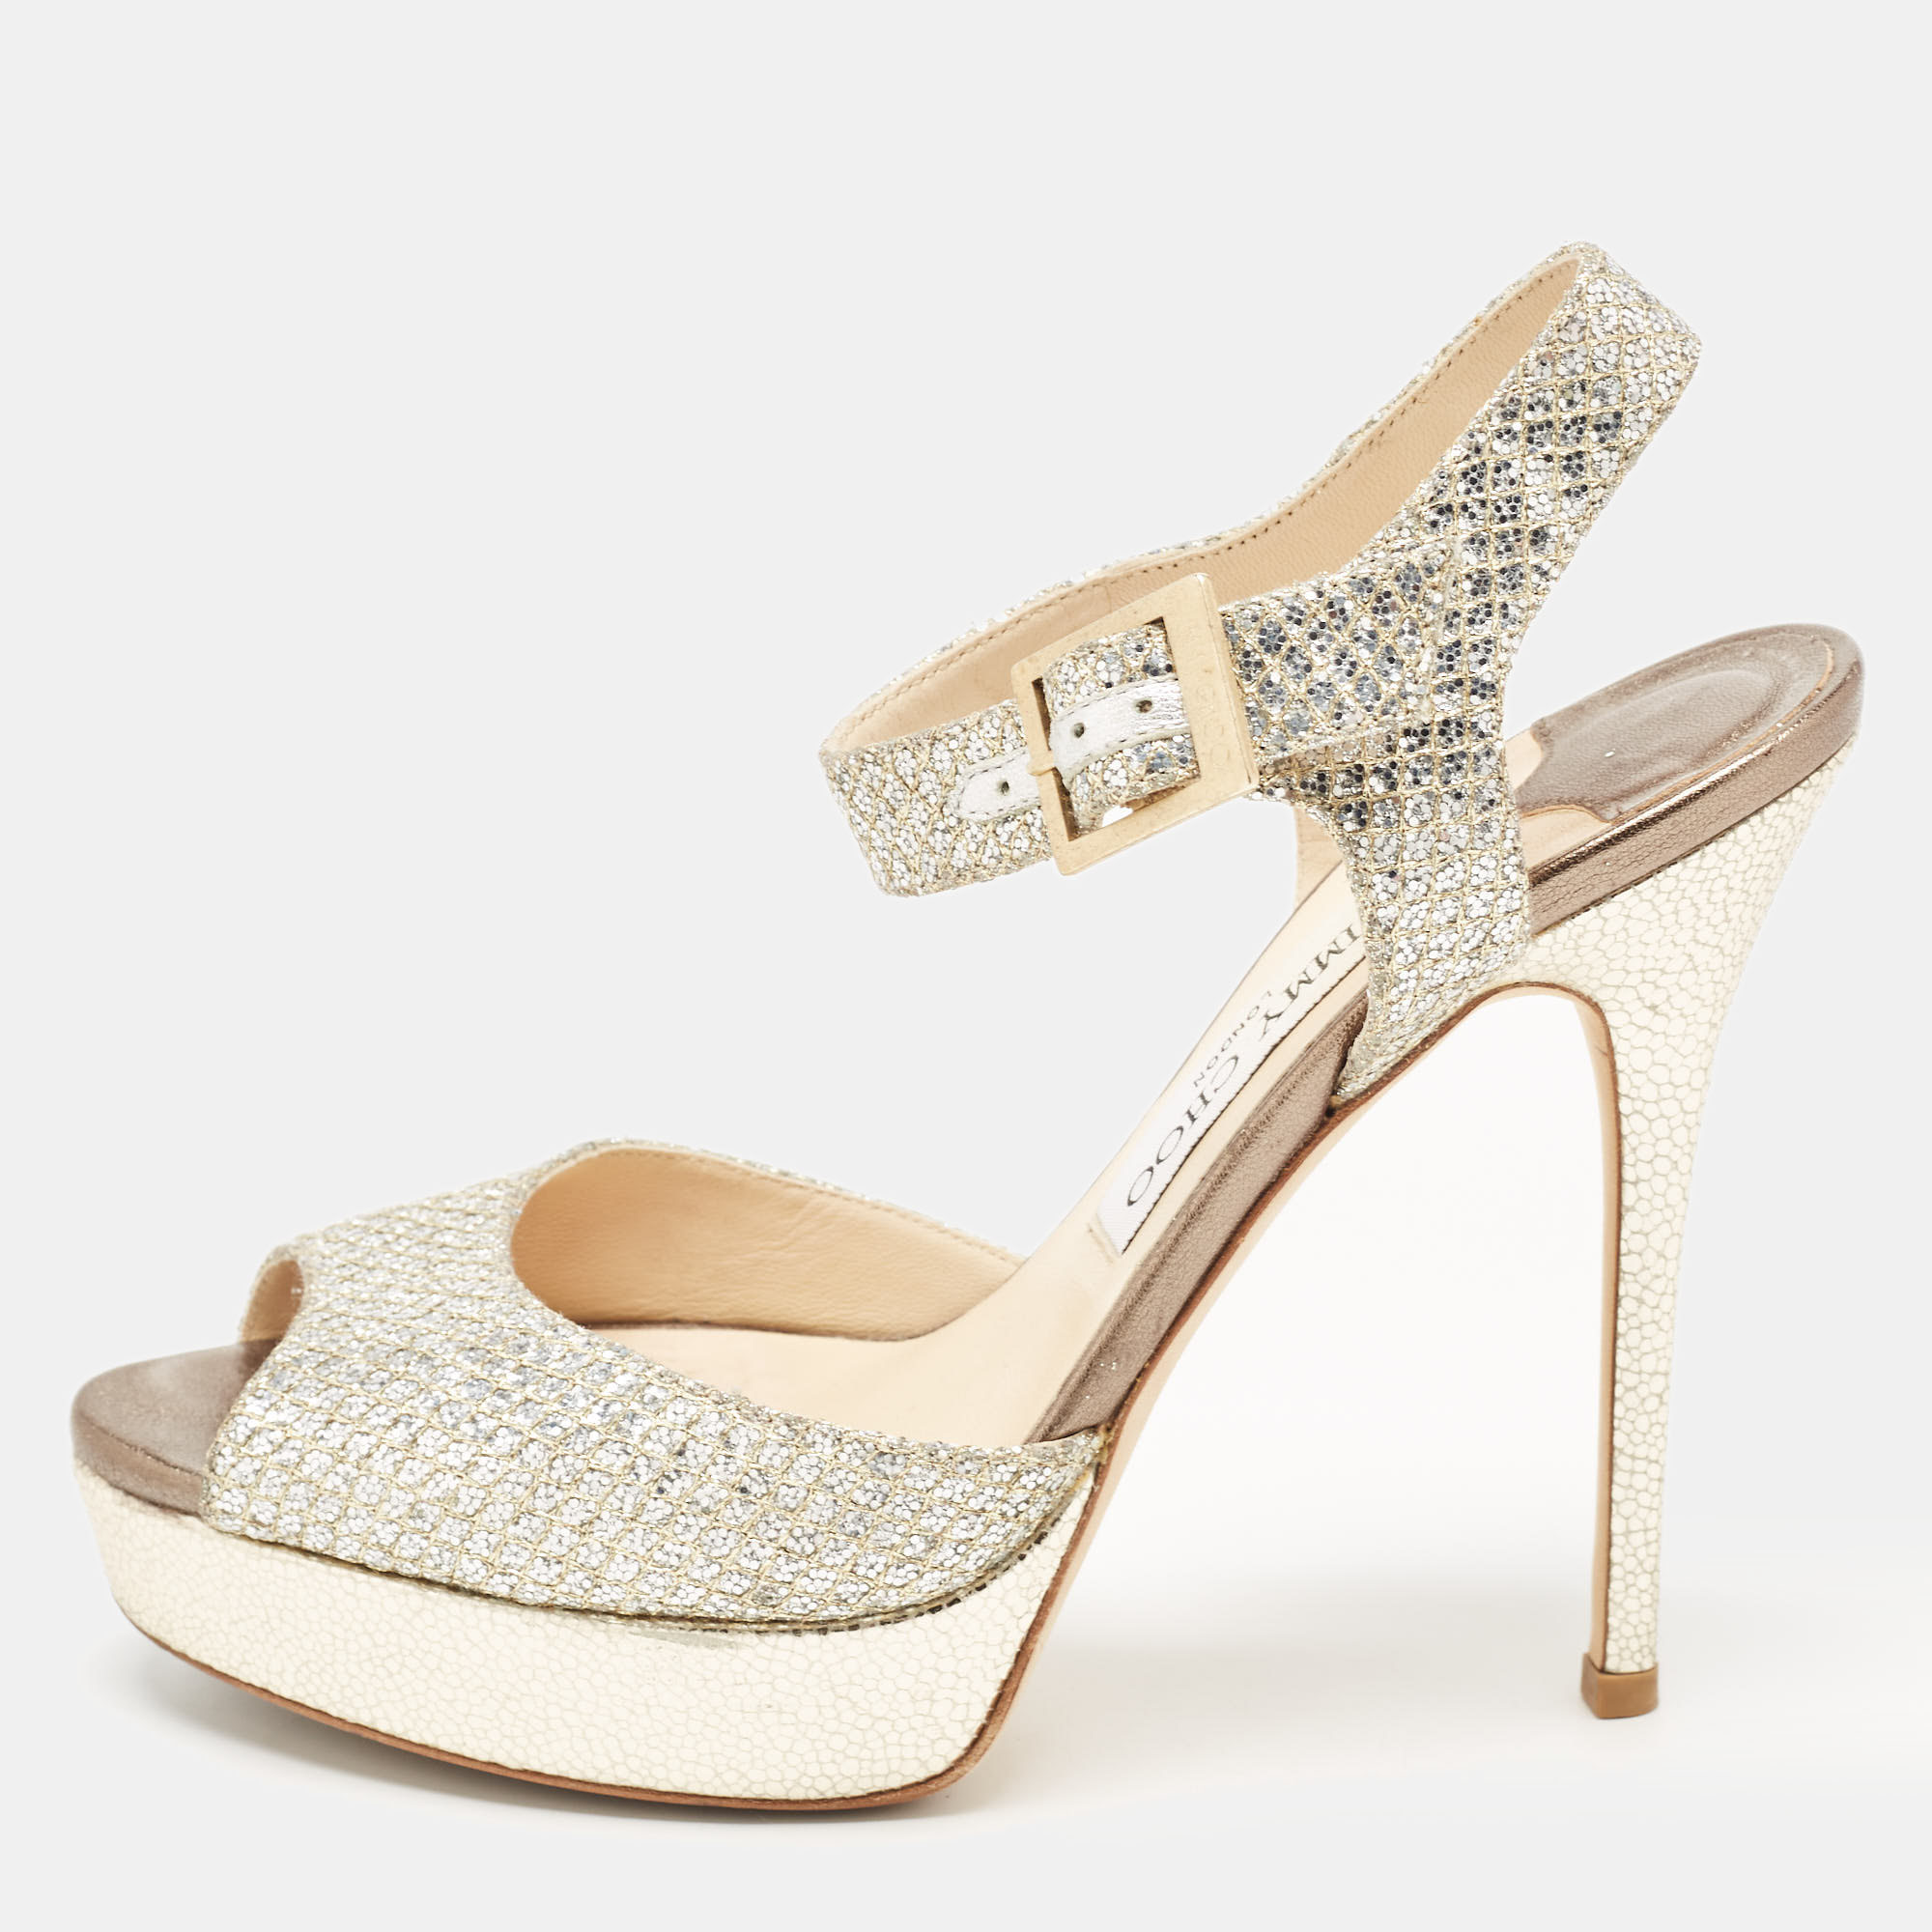 Jimmy choo silver/gold glitter and leather platform ankle strap sandals size 38.5